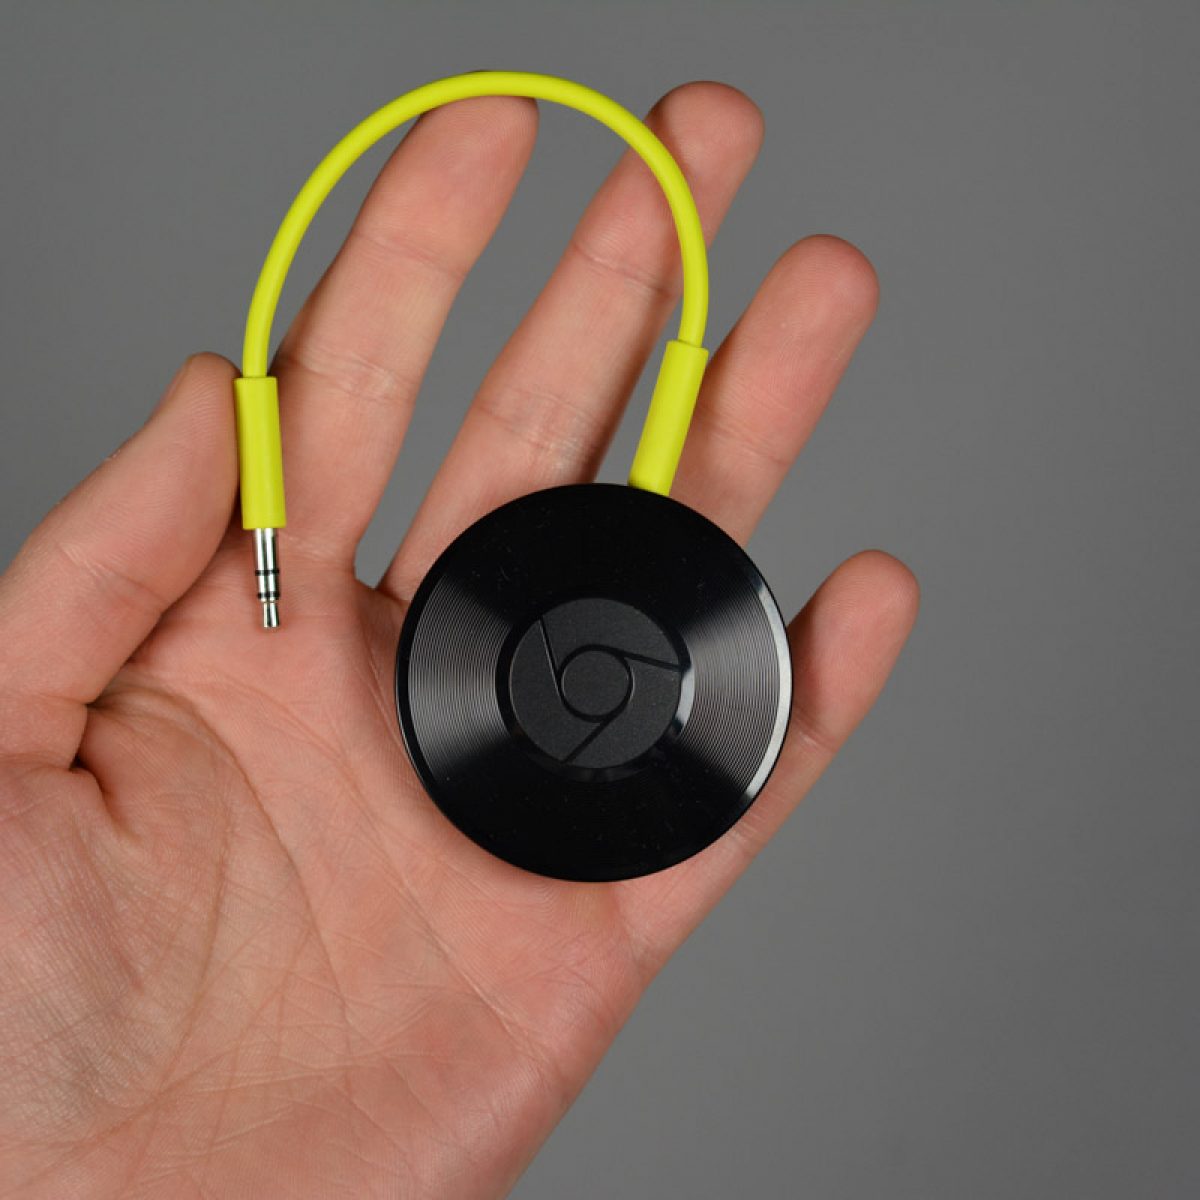 Deal: Get Two Chromecast Audio Dongles $55, Down From $70